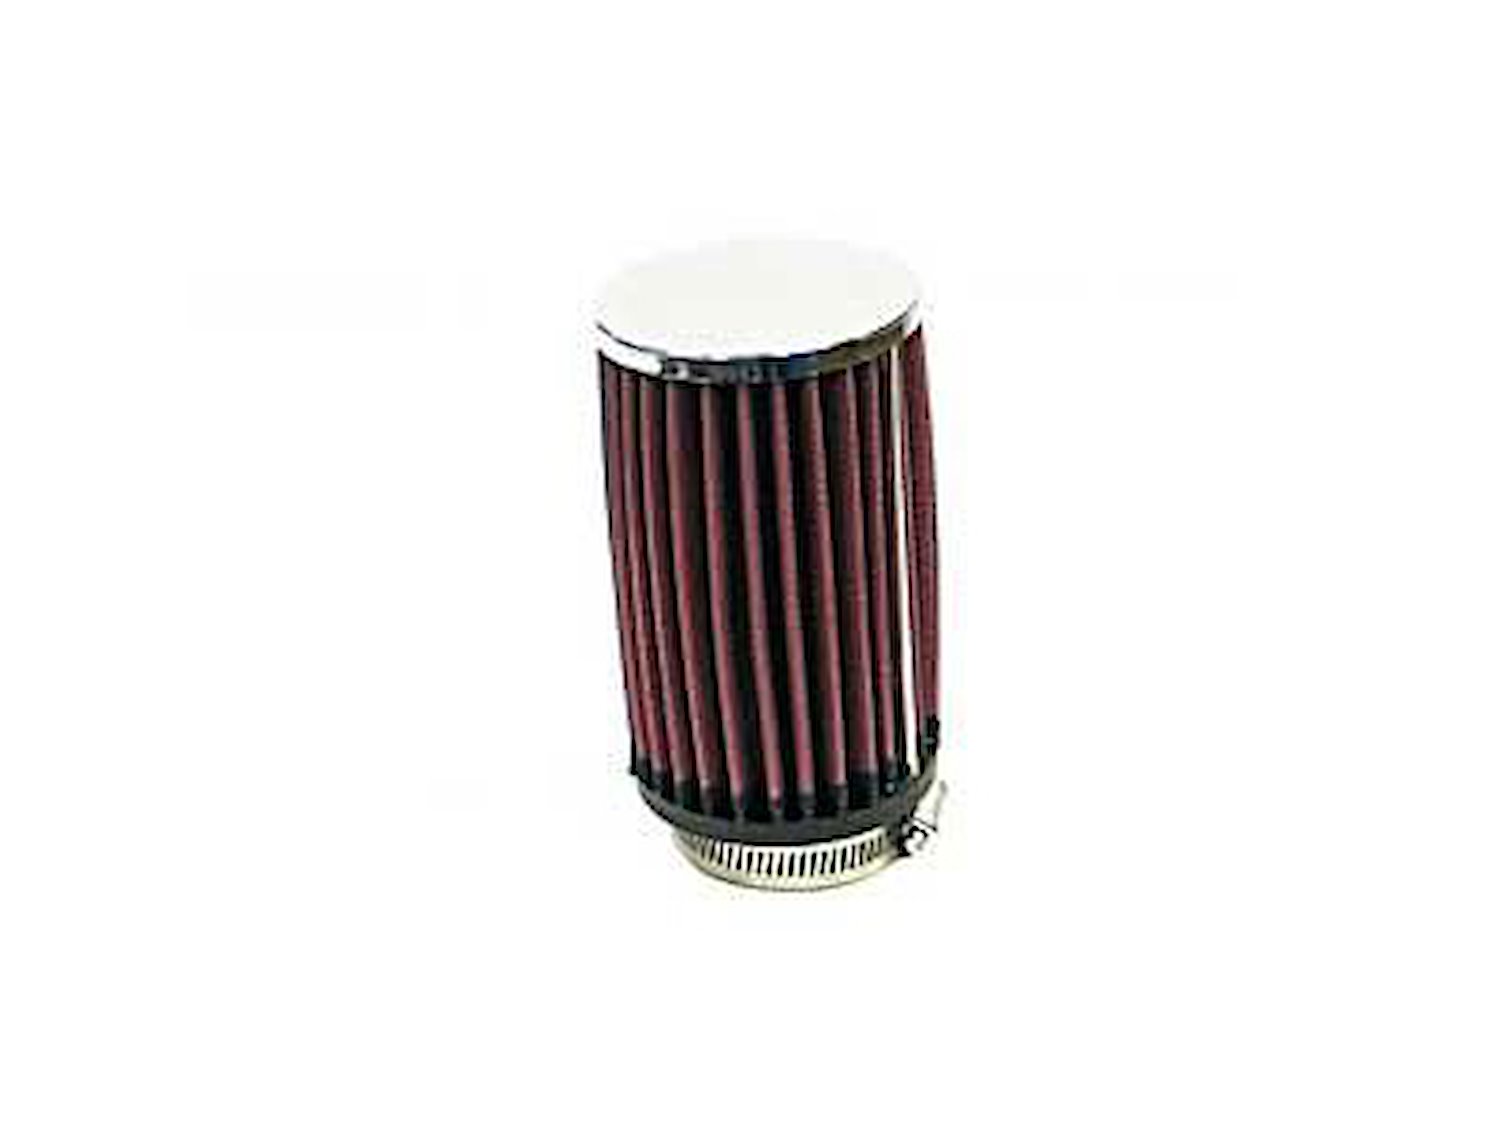 Round Straight Air Filter Flange Dia. (F): 1.875" (48 mm)